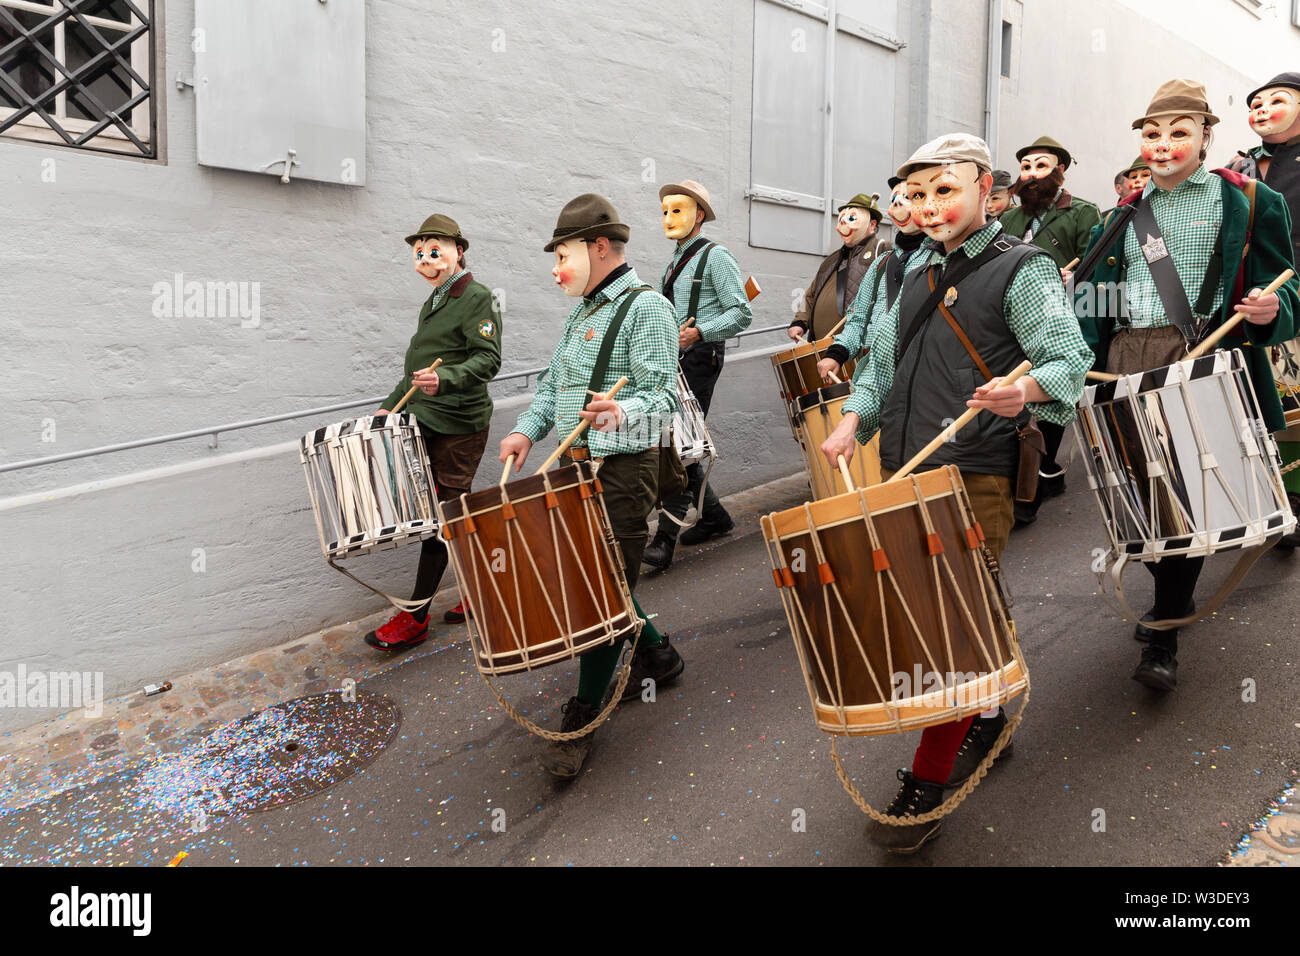 Archivgaesslein, Basel, Switzerland - March 12th, 2019. Close-up of a snare drum player group Stock Photo